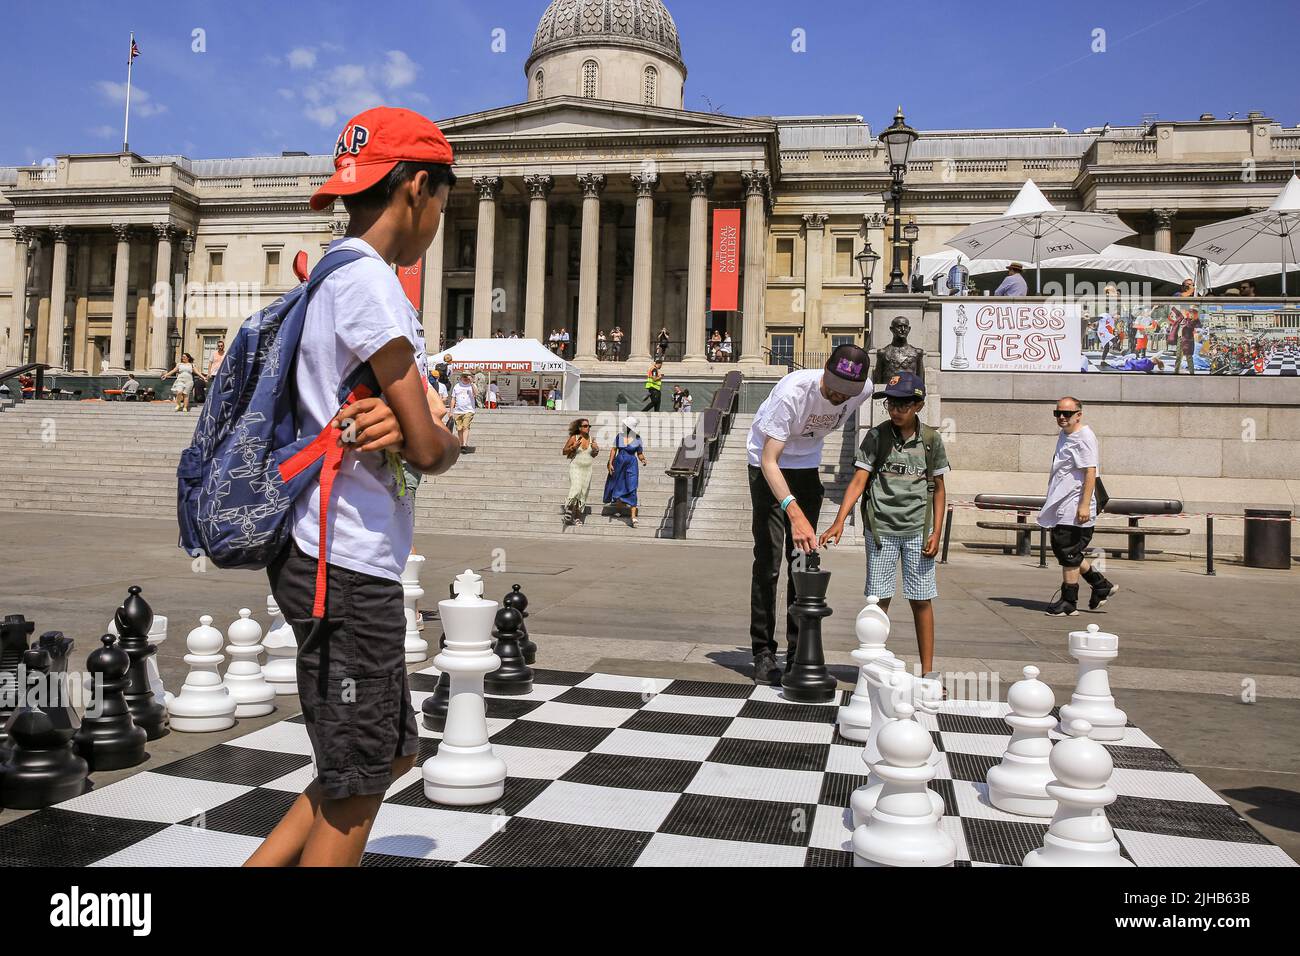 London, UK. 17th July, 2022. Players of all ages and capabilities play chess on the square. The UK's largest one-day chess event takes place on London's Trafalgar Square and is aimed at anyone who loves or wants to learn chess, and is free of charge. Credit: Imageplotter/Alamy Live News Stock Photo